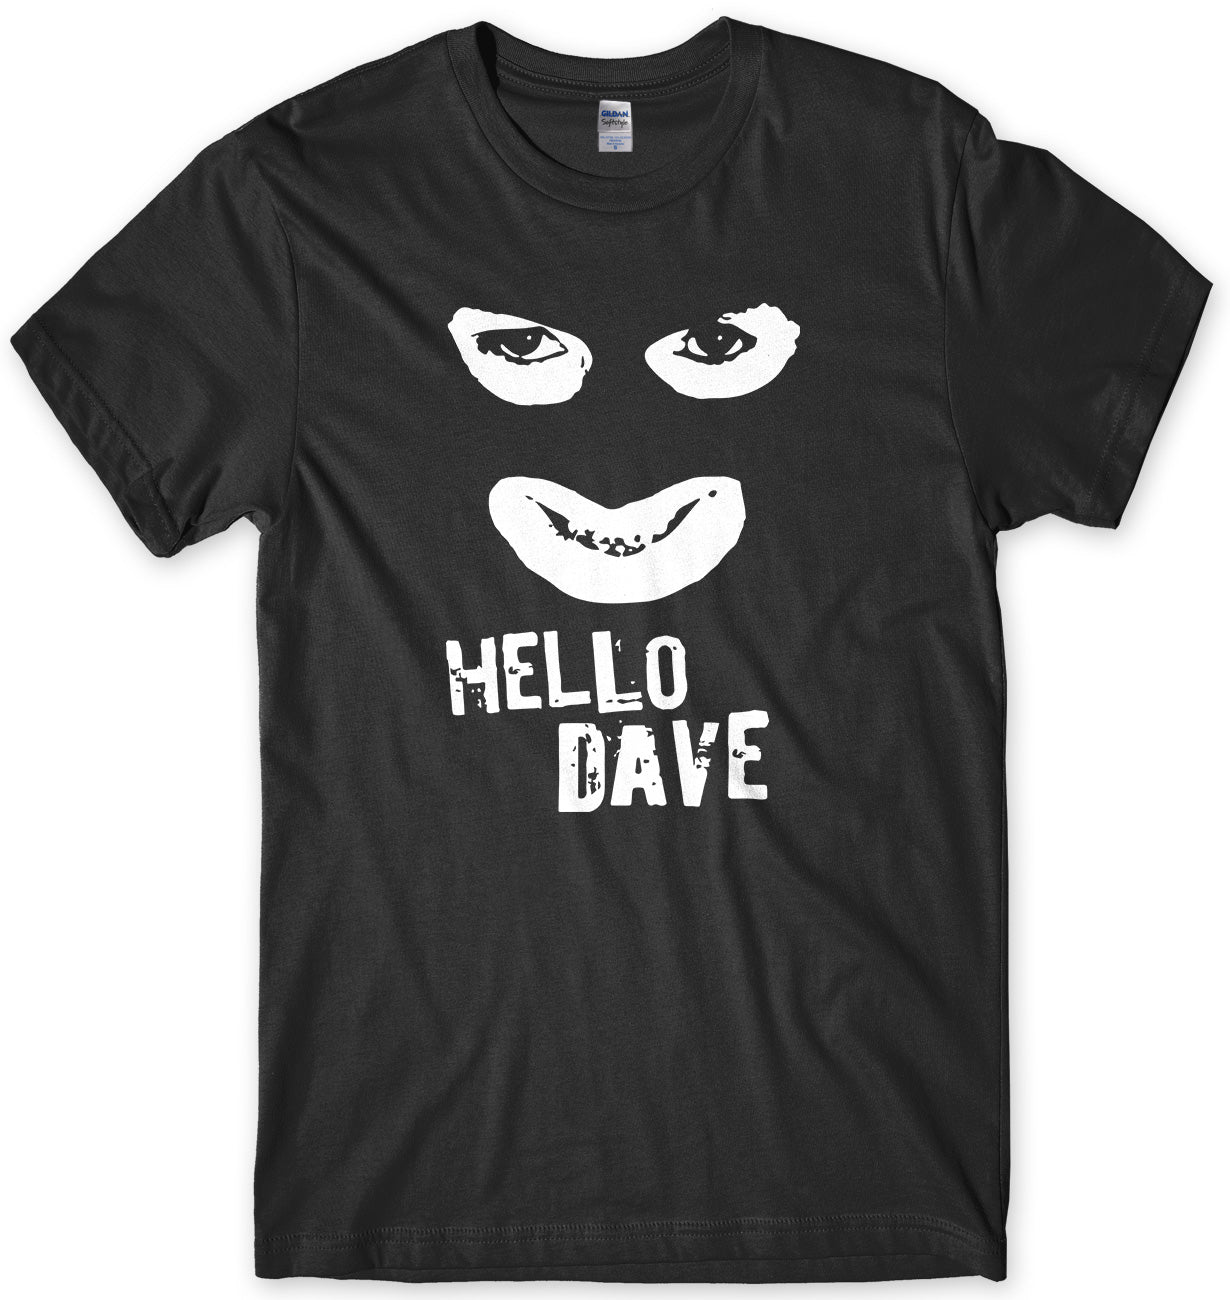 HELLO DAVE - INSPIRED BY THE LEAGUE OF GENTLEMEN MENS UNISEX T-SHIRT